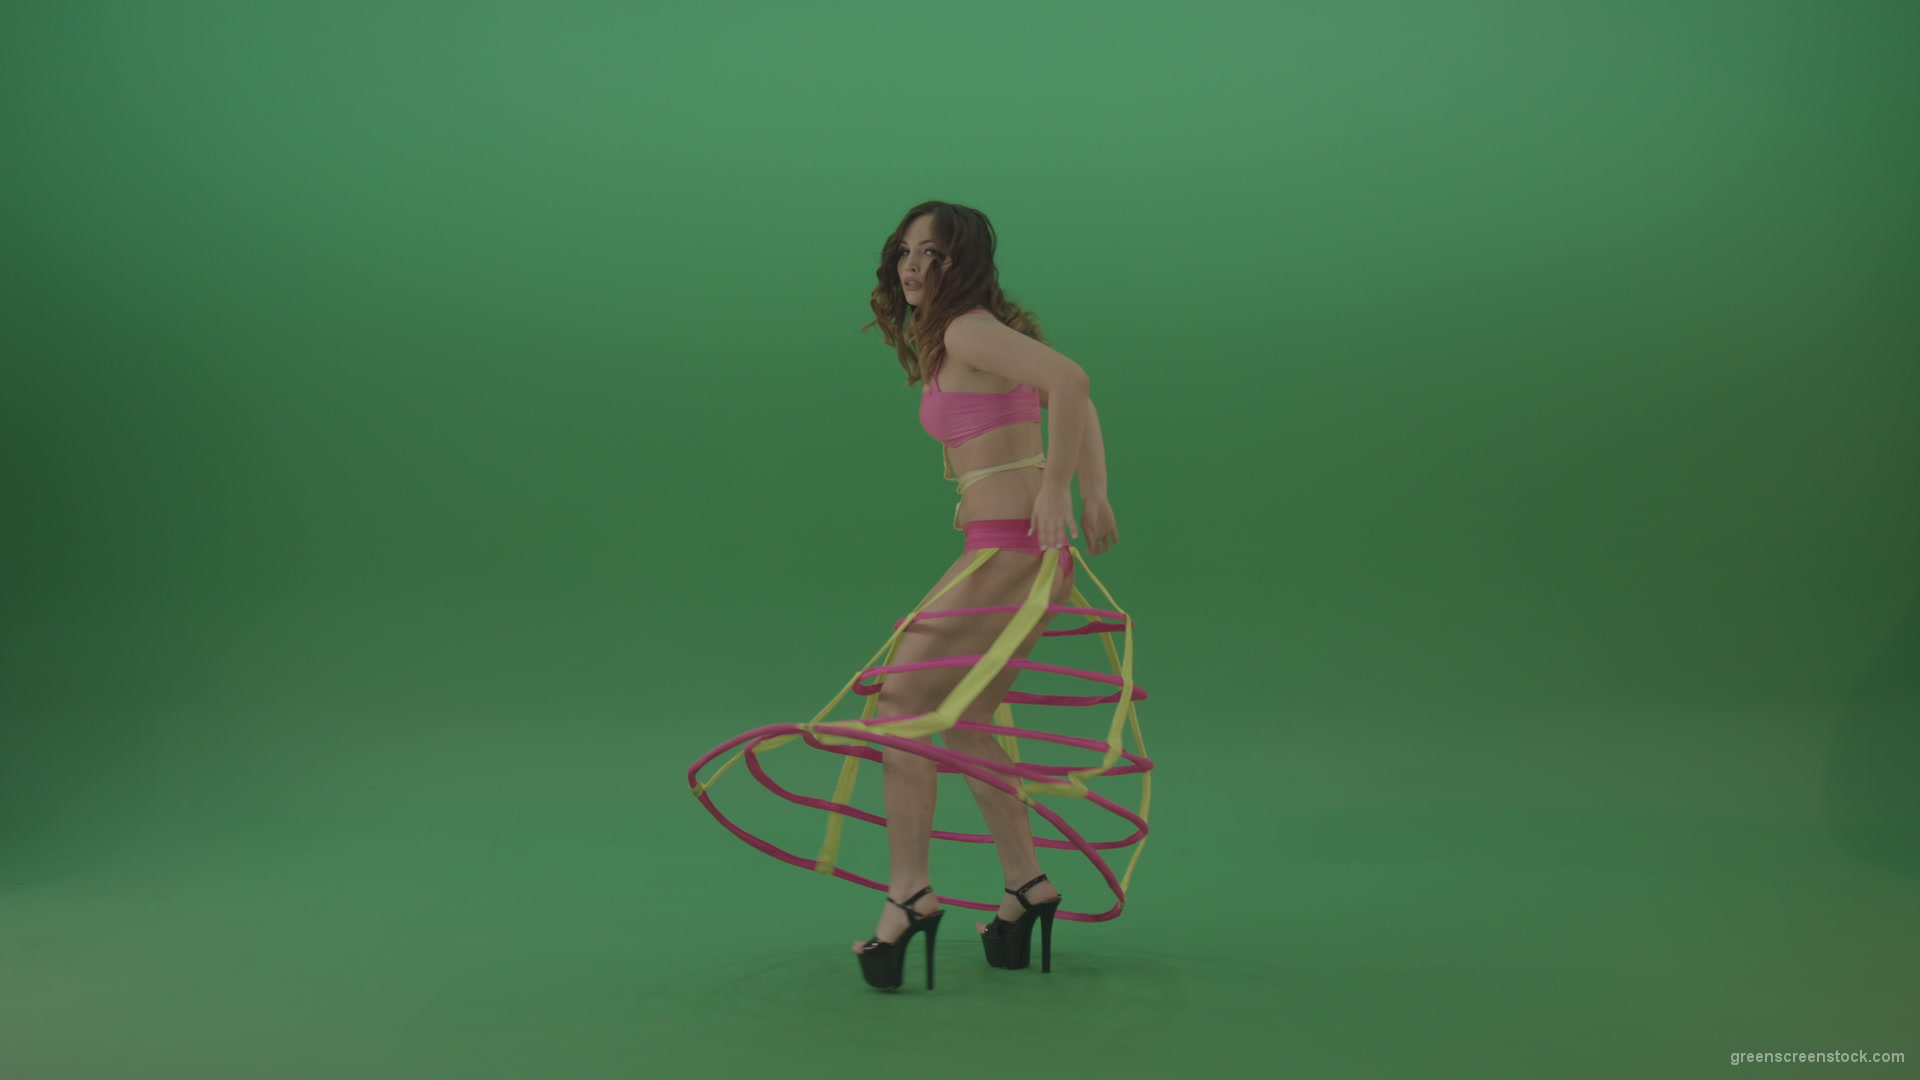 With-a-beautiful-appearance-brunette-in-an-extraordinary-costume-dancing-on-green-screen_006 Green Screen Stock